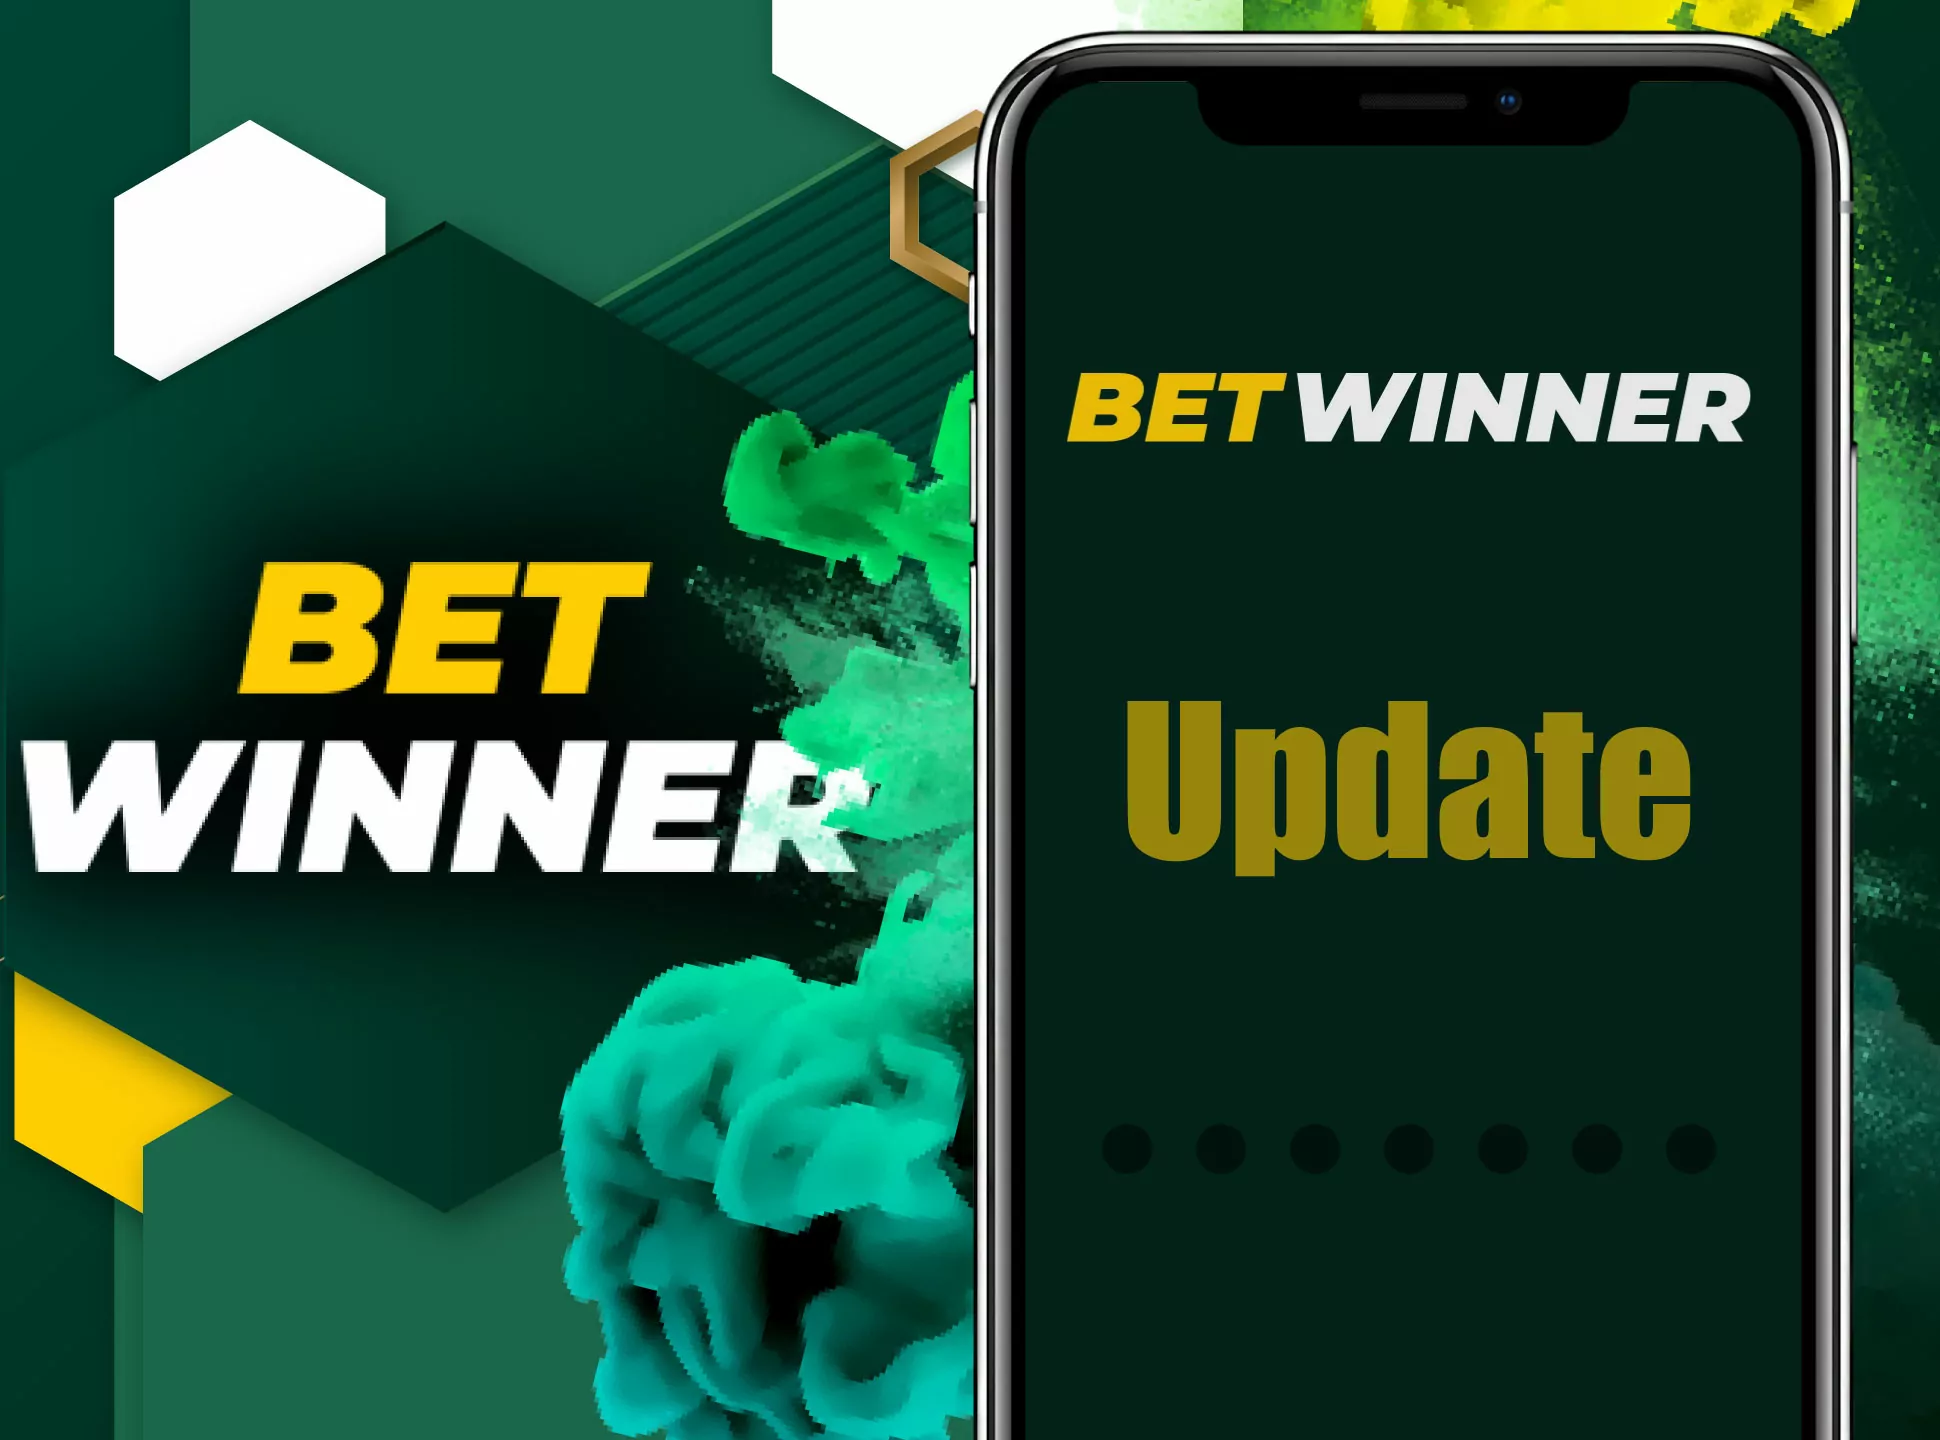 Betwinner app can update automatically.